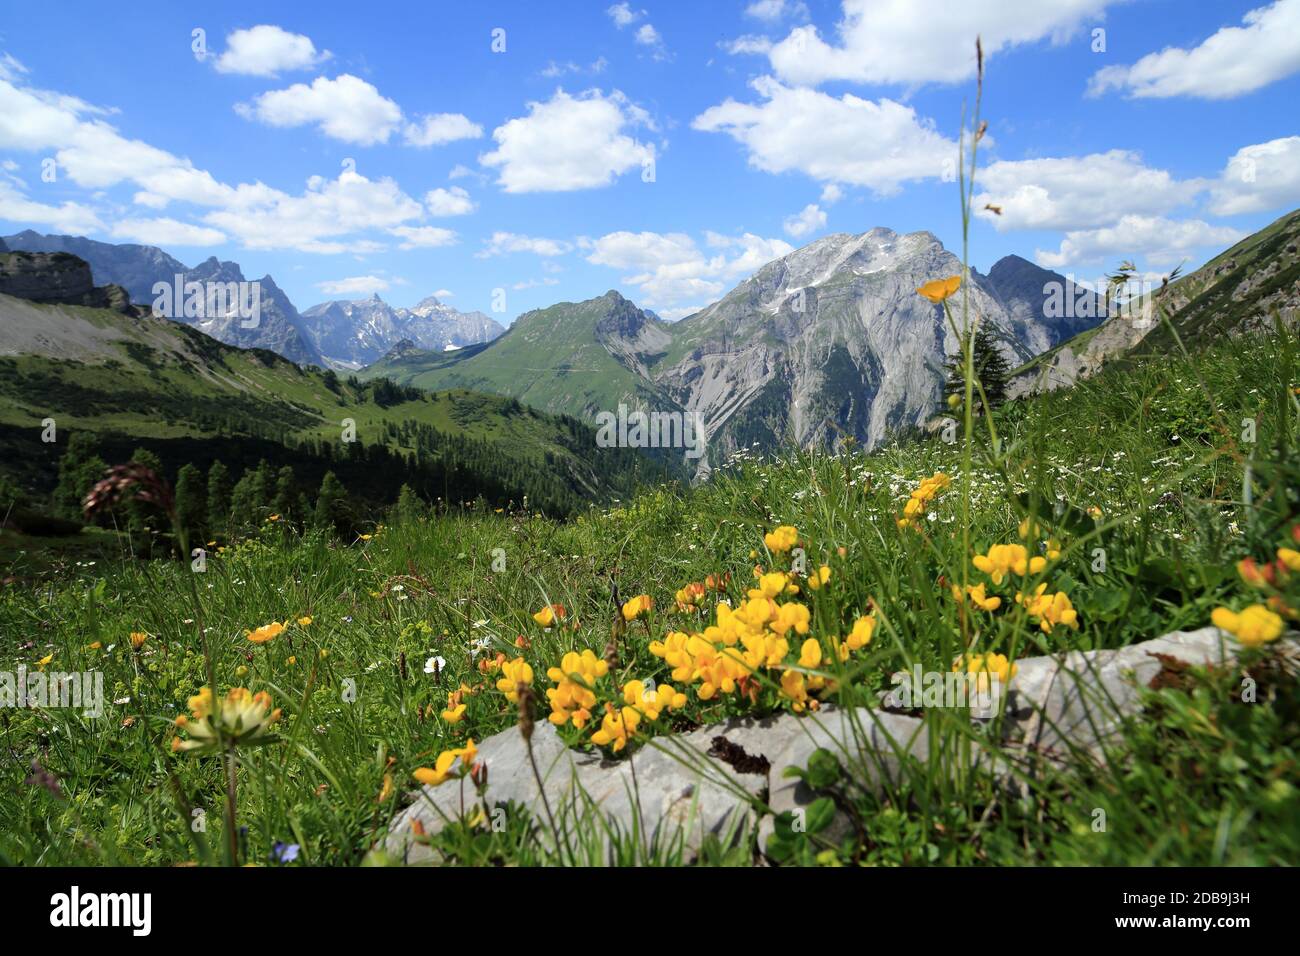 some different flowers in front of a mountain landscape Stock Photo